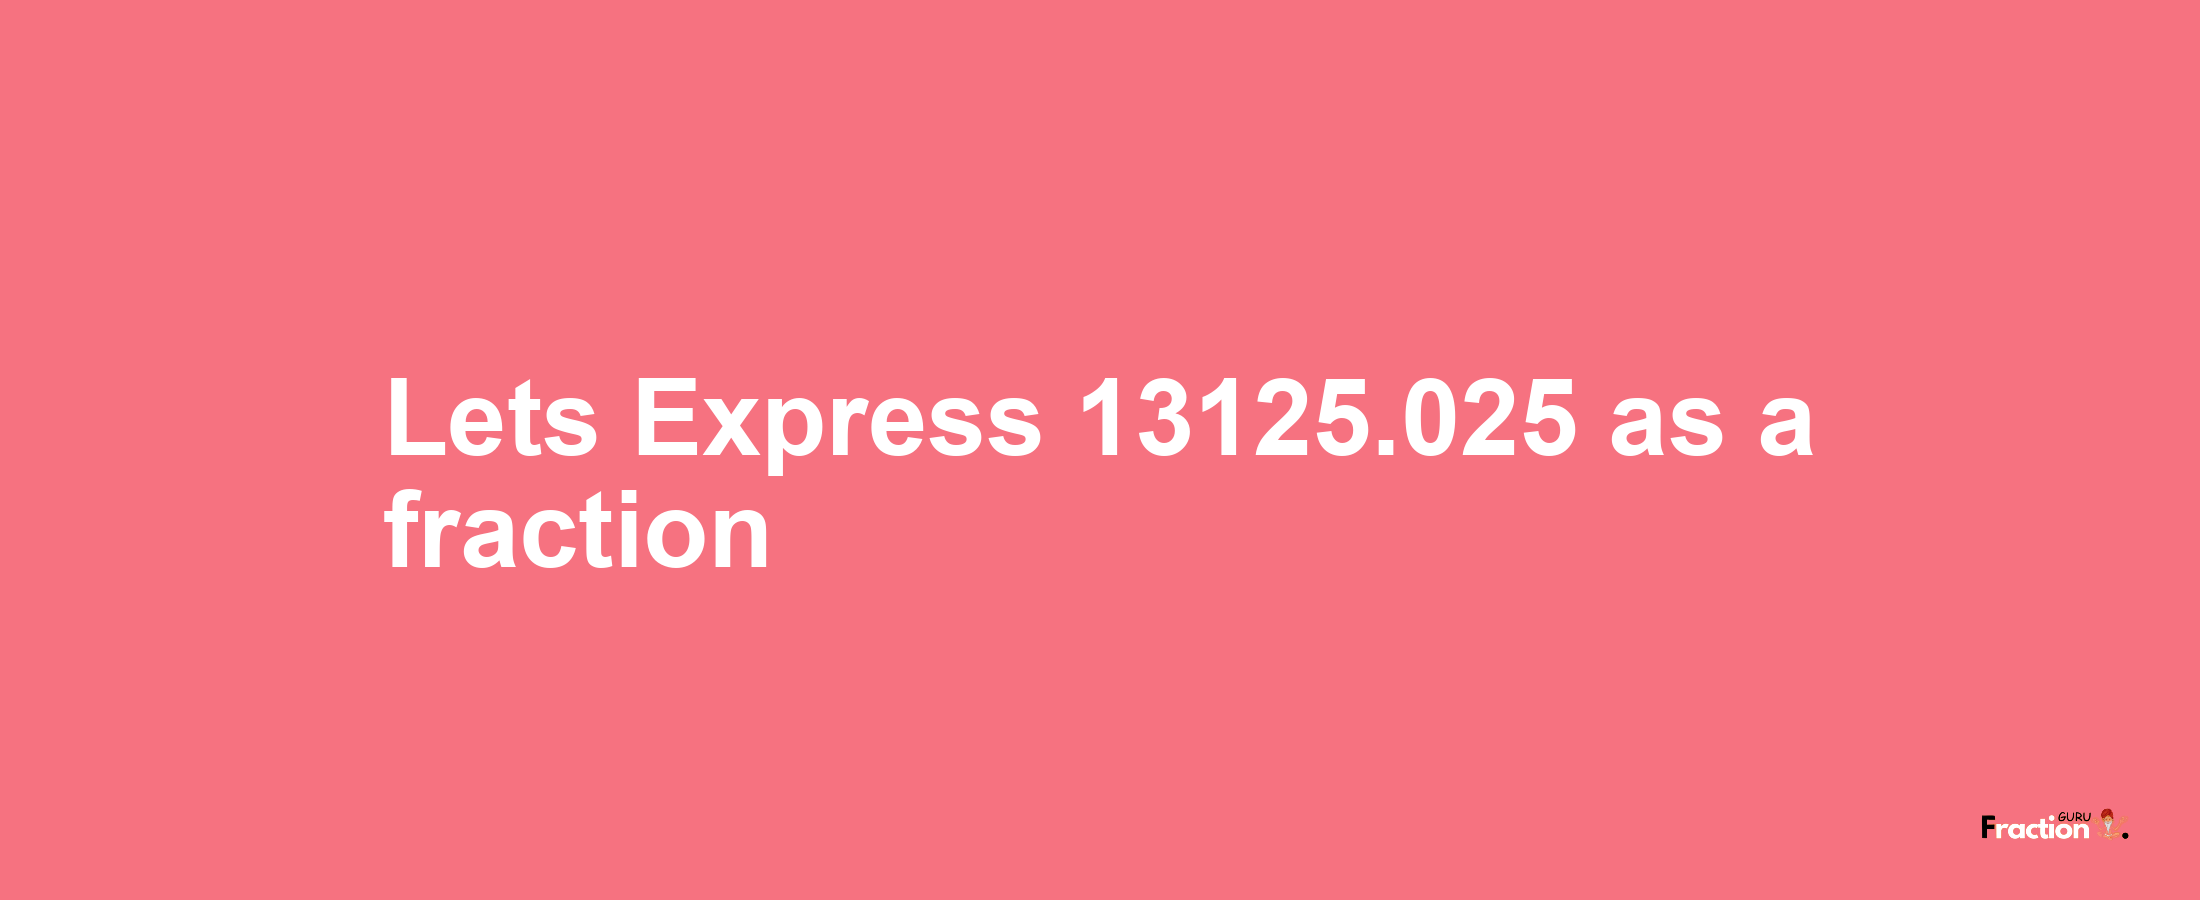 Lets Express 13125.025 as afraction